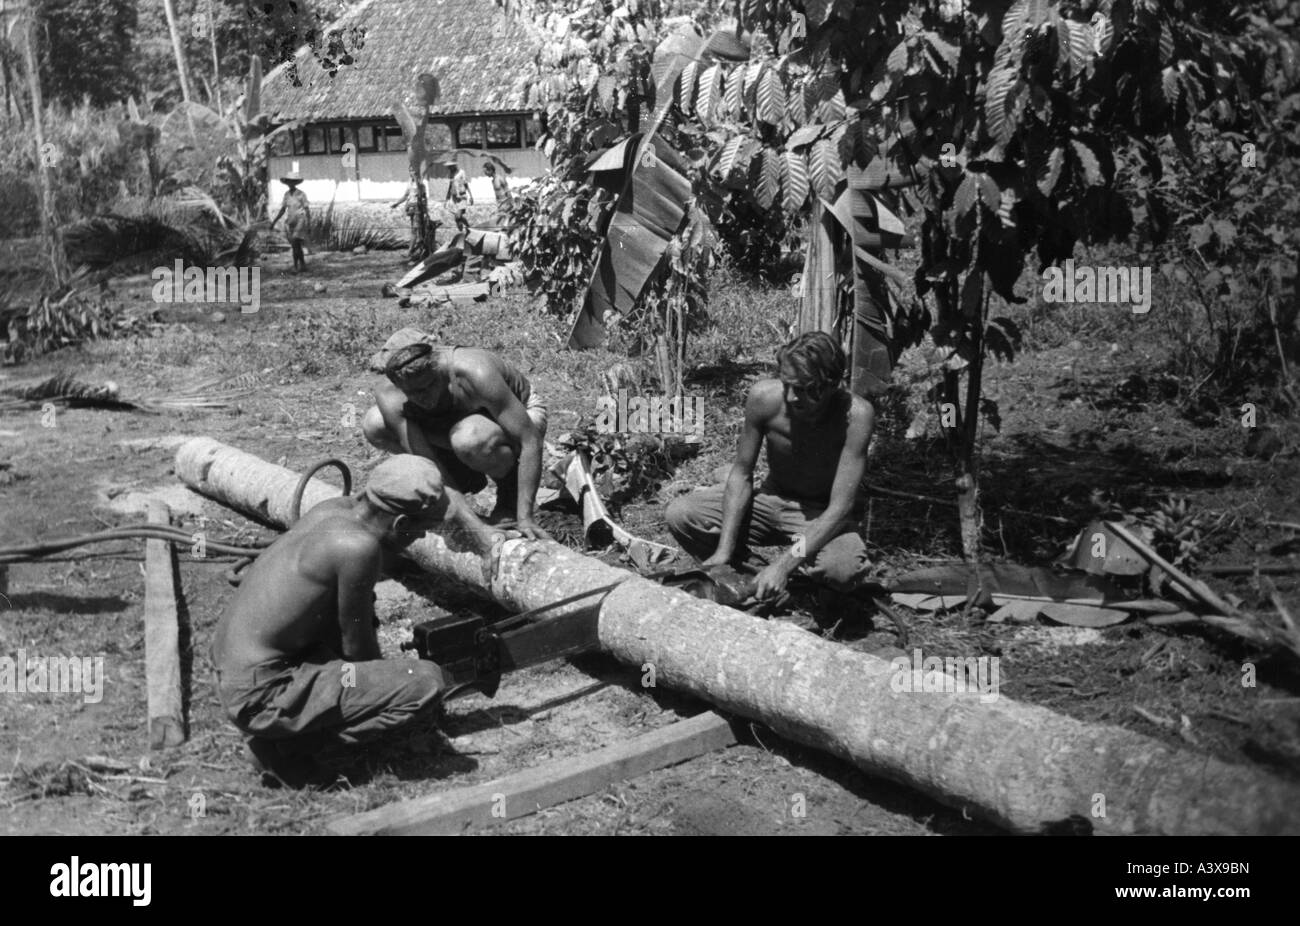 geography/travel, Indonesia, War of Independence 1947 - 1949, dutch troops cutting wood for an entrenchment, Bogor, Java, 1947, Buitenzorg, occupation, Dutch East Indies, colonialism, military, Netherlands, Asia, 20th century, historic, historical, people, 1940s, Stock Photo